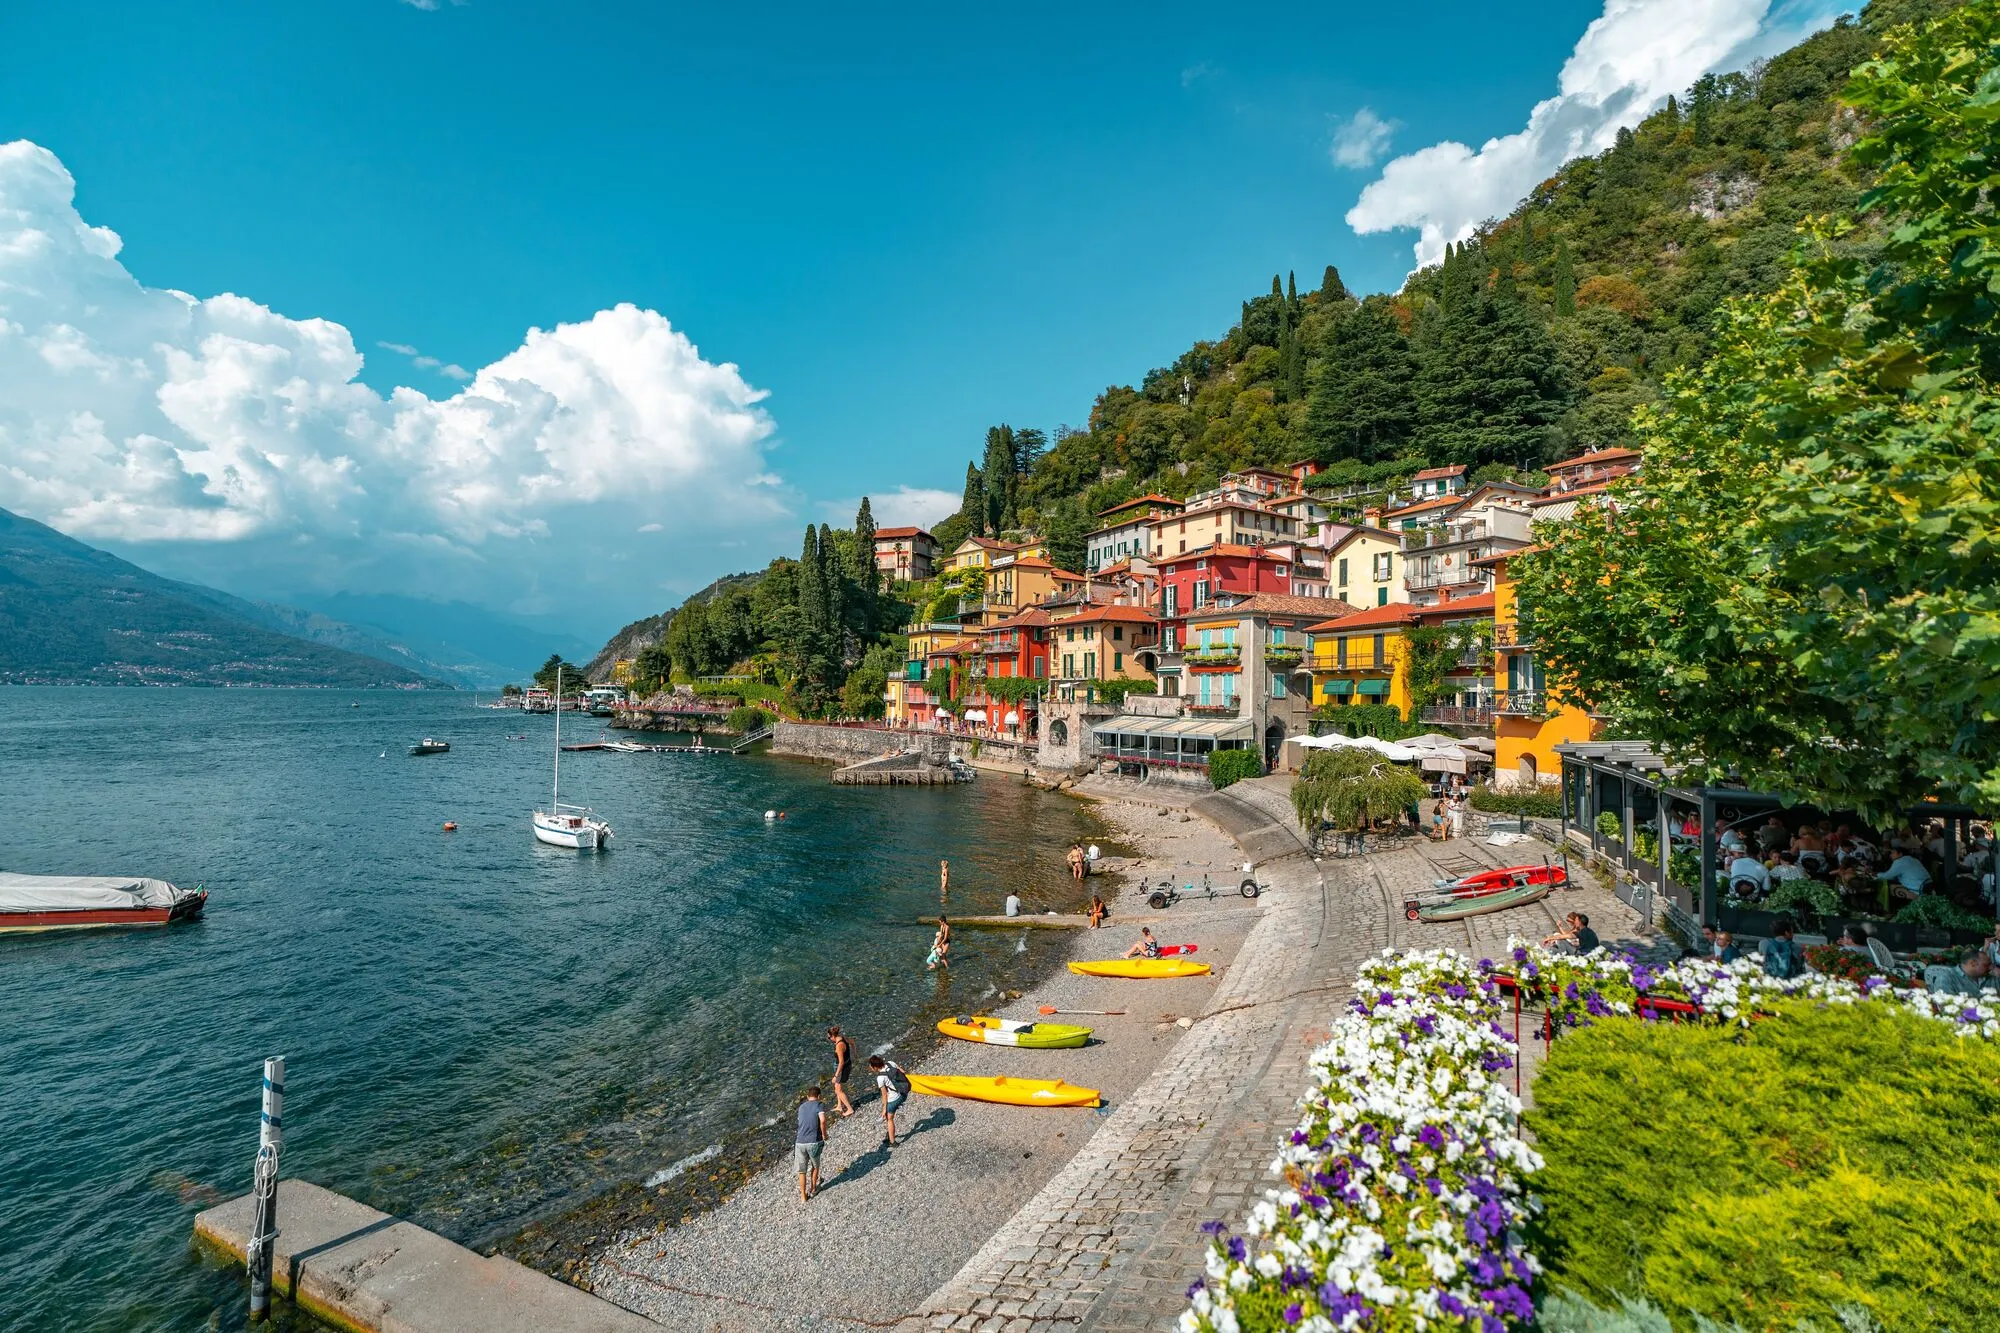 10 BEST Places to Visit in Lake Como - A Travel Guide For First-Timers